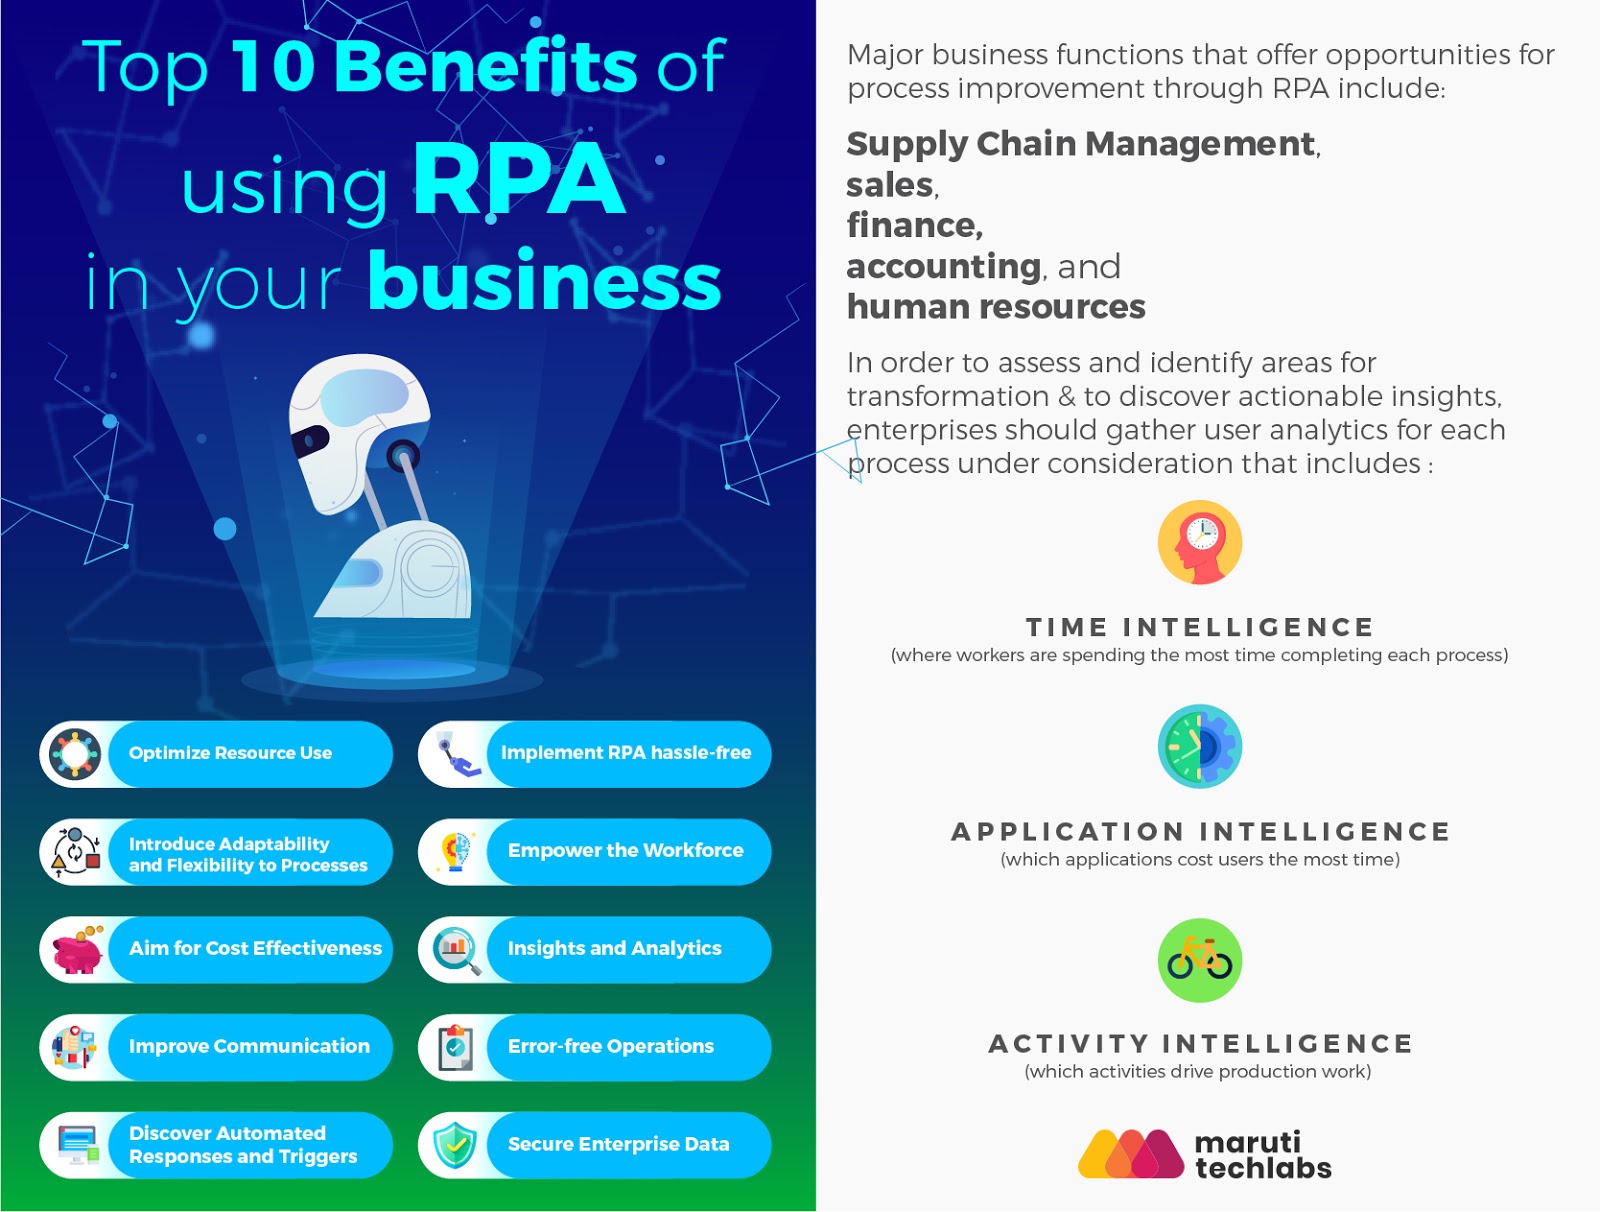 Top 10 Benefits of RPA in Business